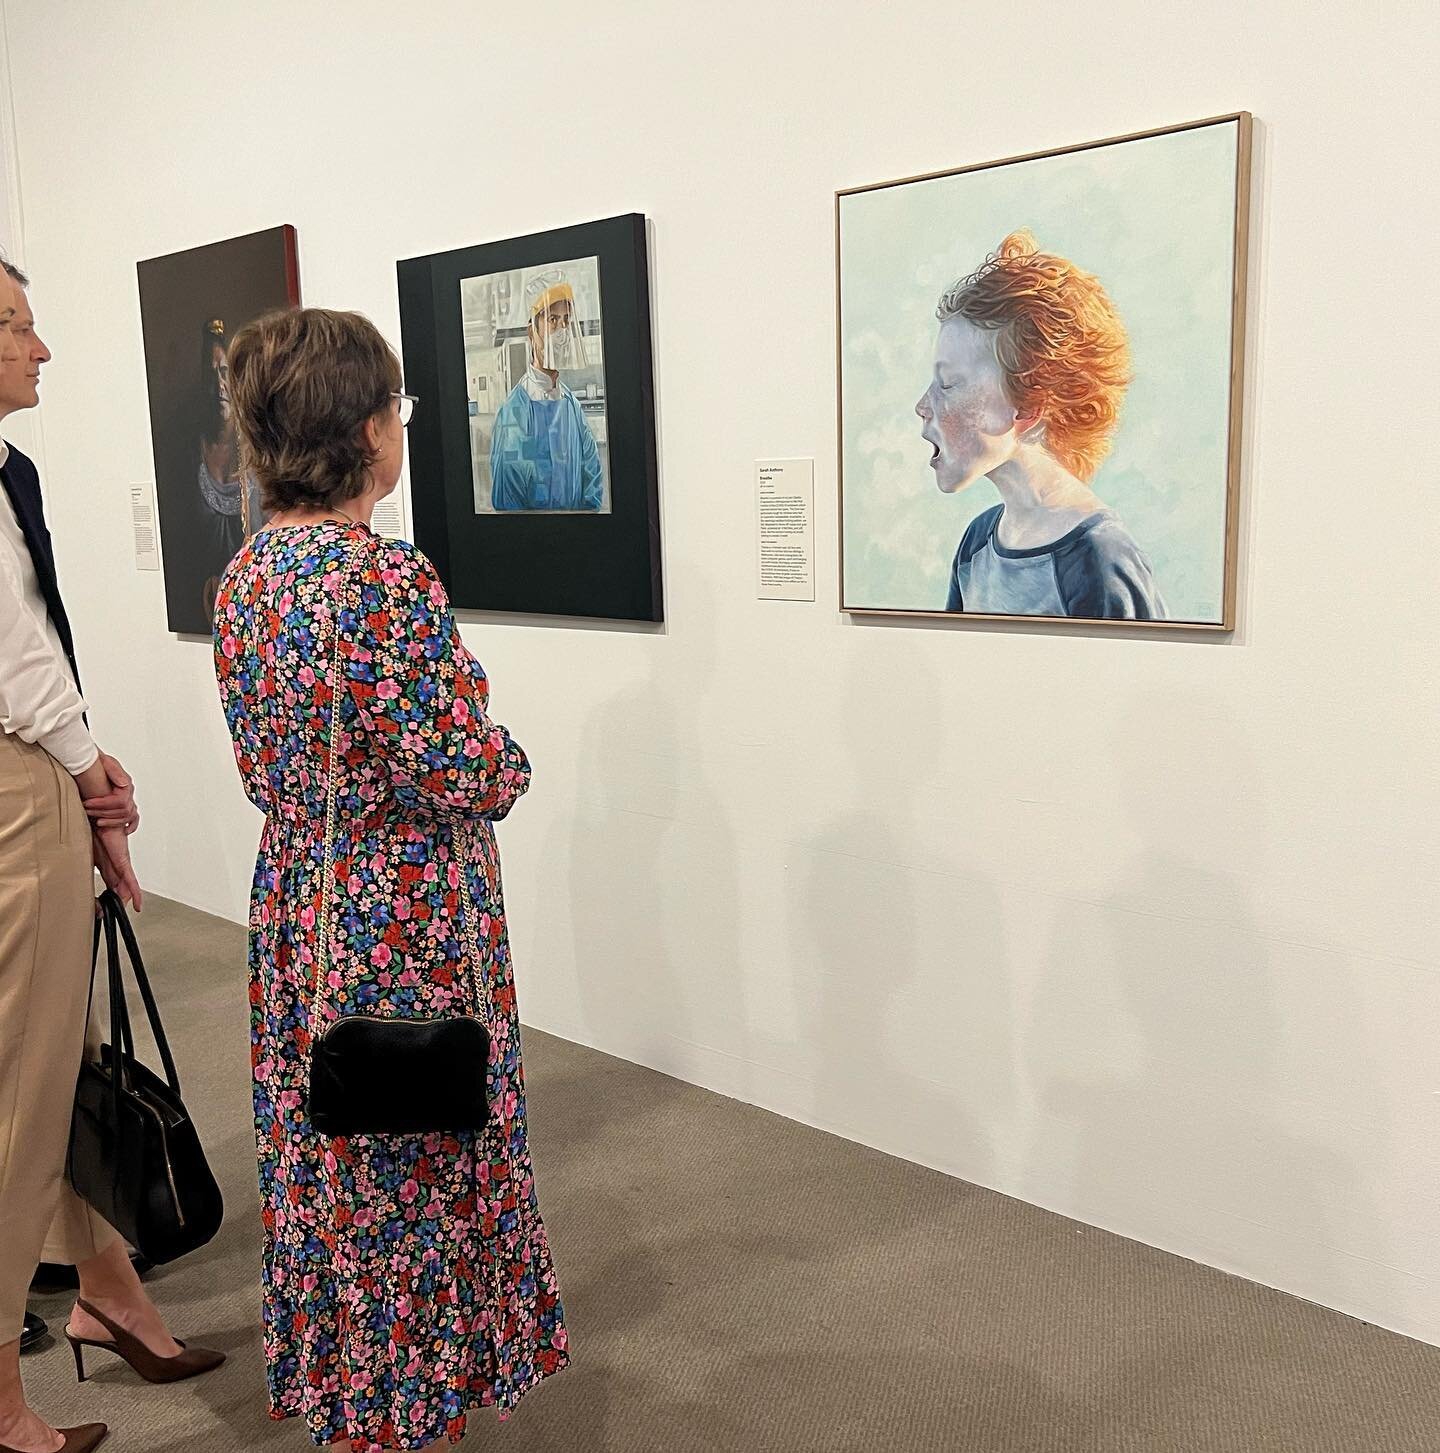 Last week to view the Lester Prize at the Art Gallery of WA before it heads off on the regional tour. Don&rsquo;t forget to cast your vote for People&rsquo;s Prize too!

Link to vote in bio 😊

#thelesterprize #lesterprize #lesterprize2022 #artgaller